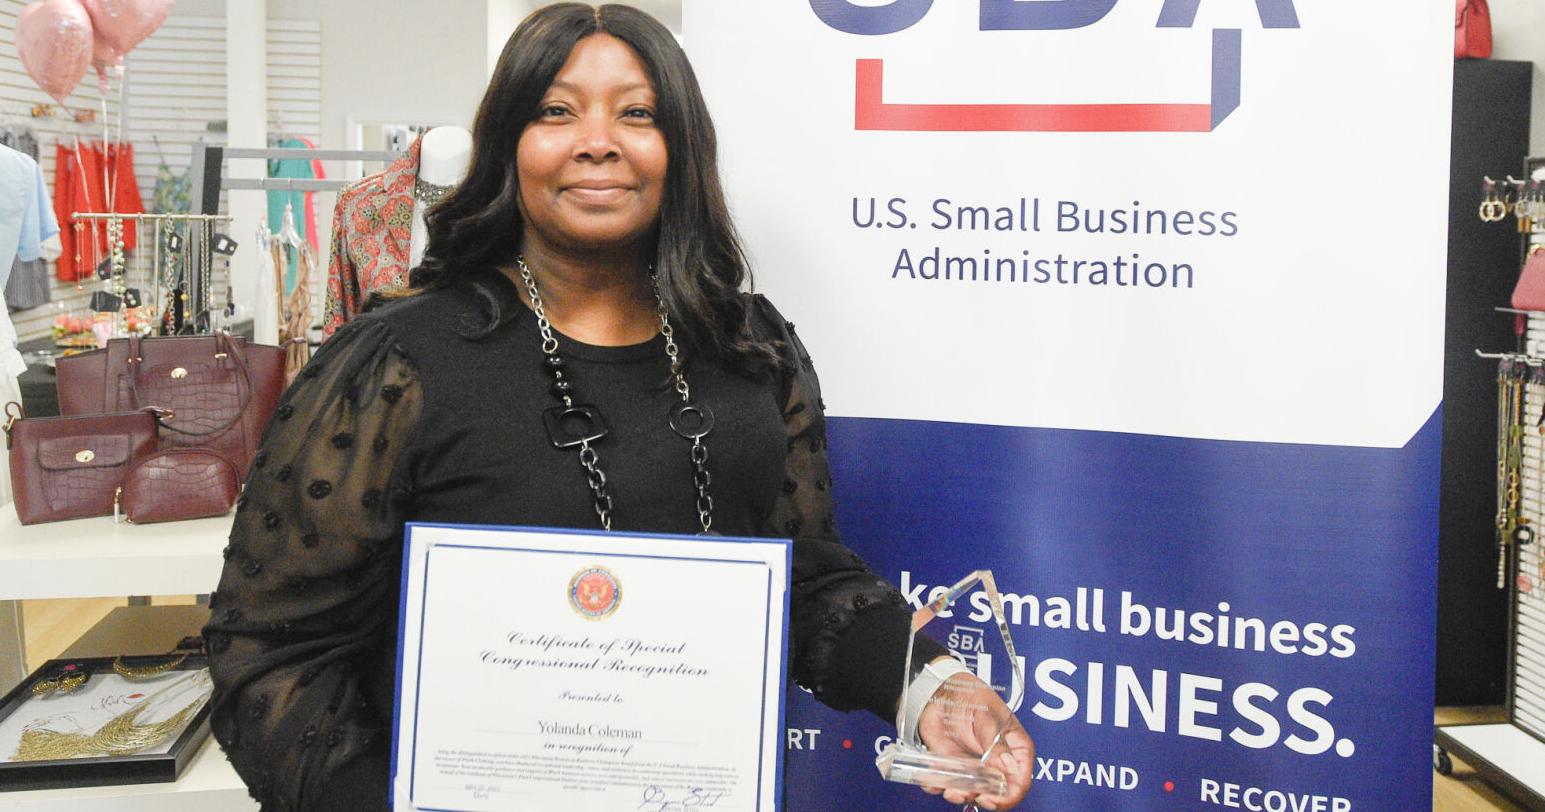 Downtown business owner recognized for her success and willingness to help others